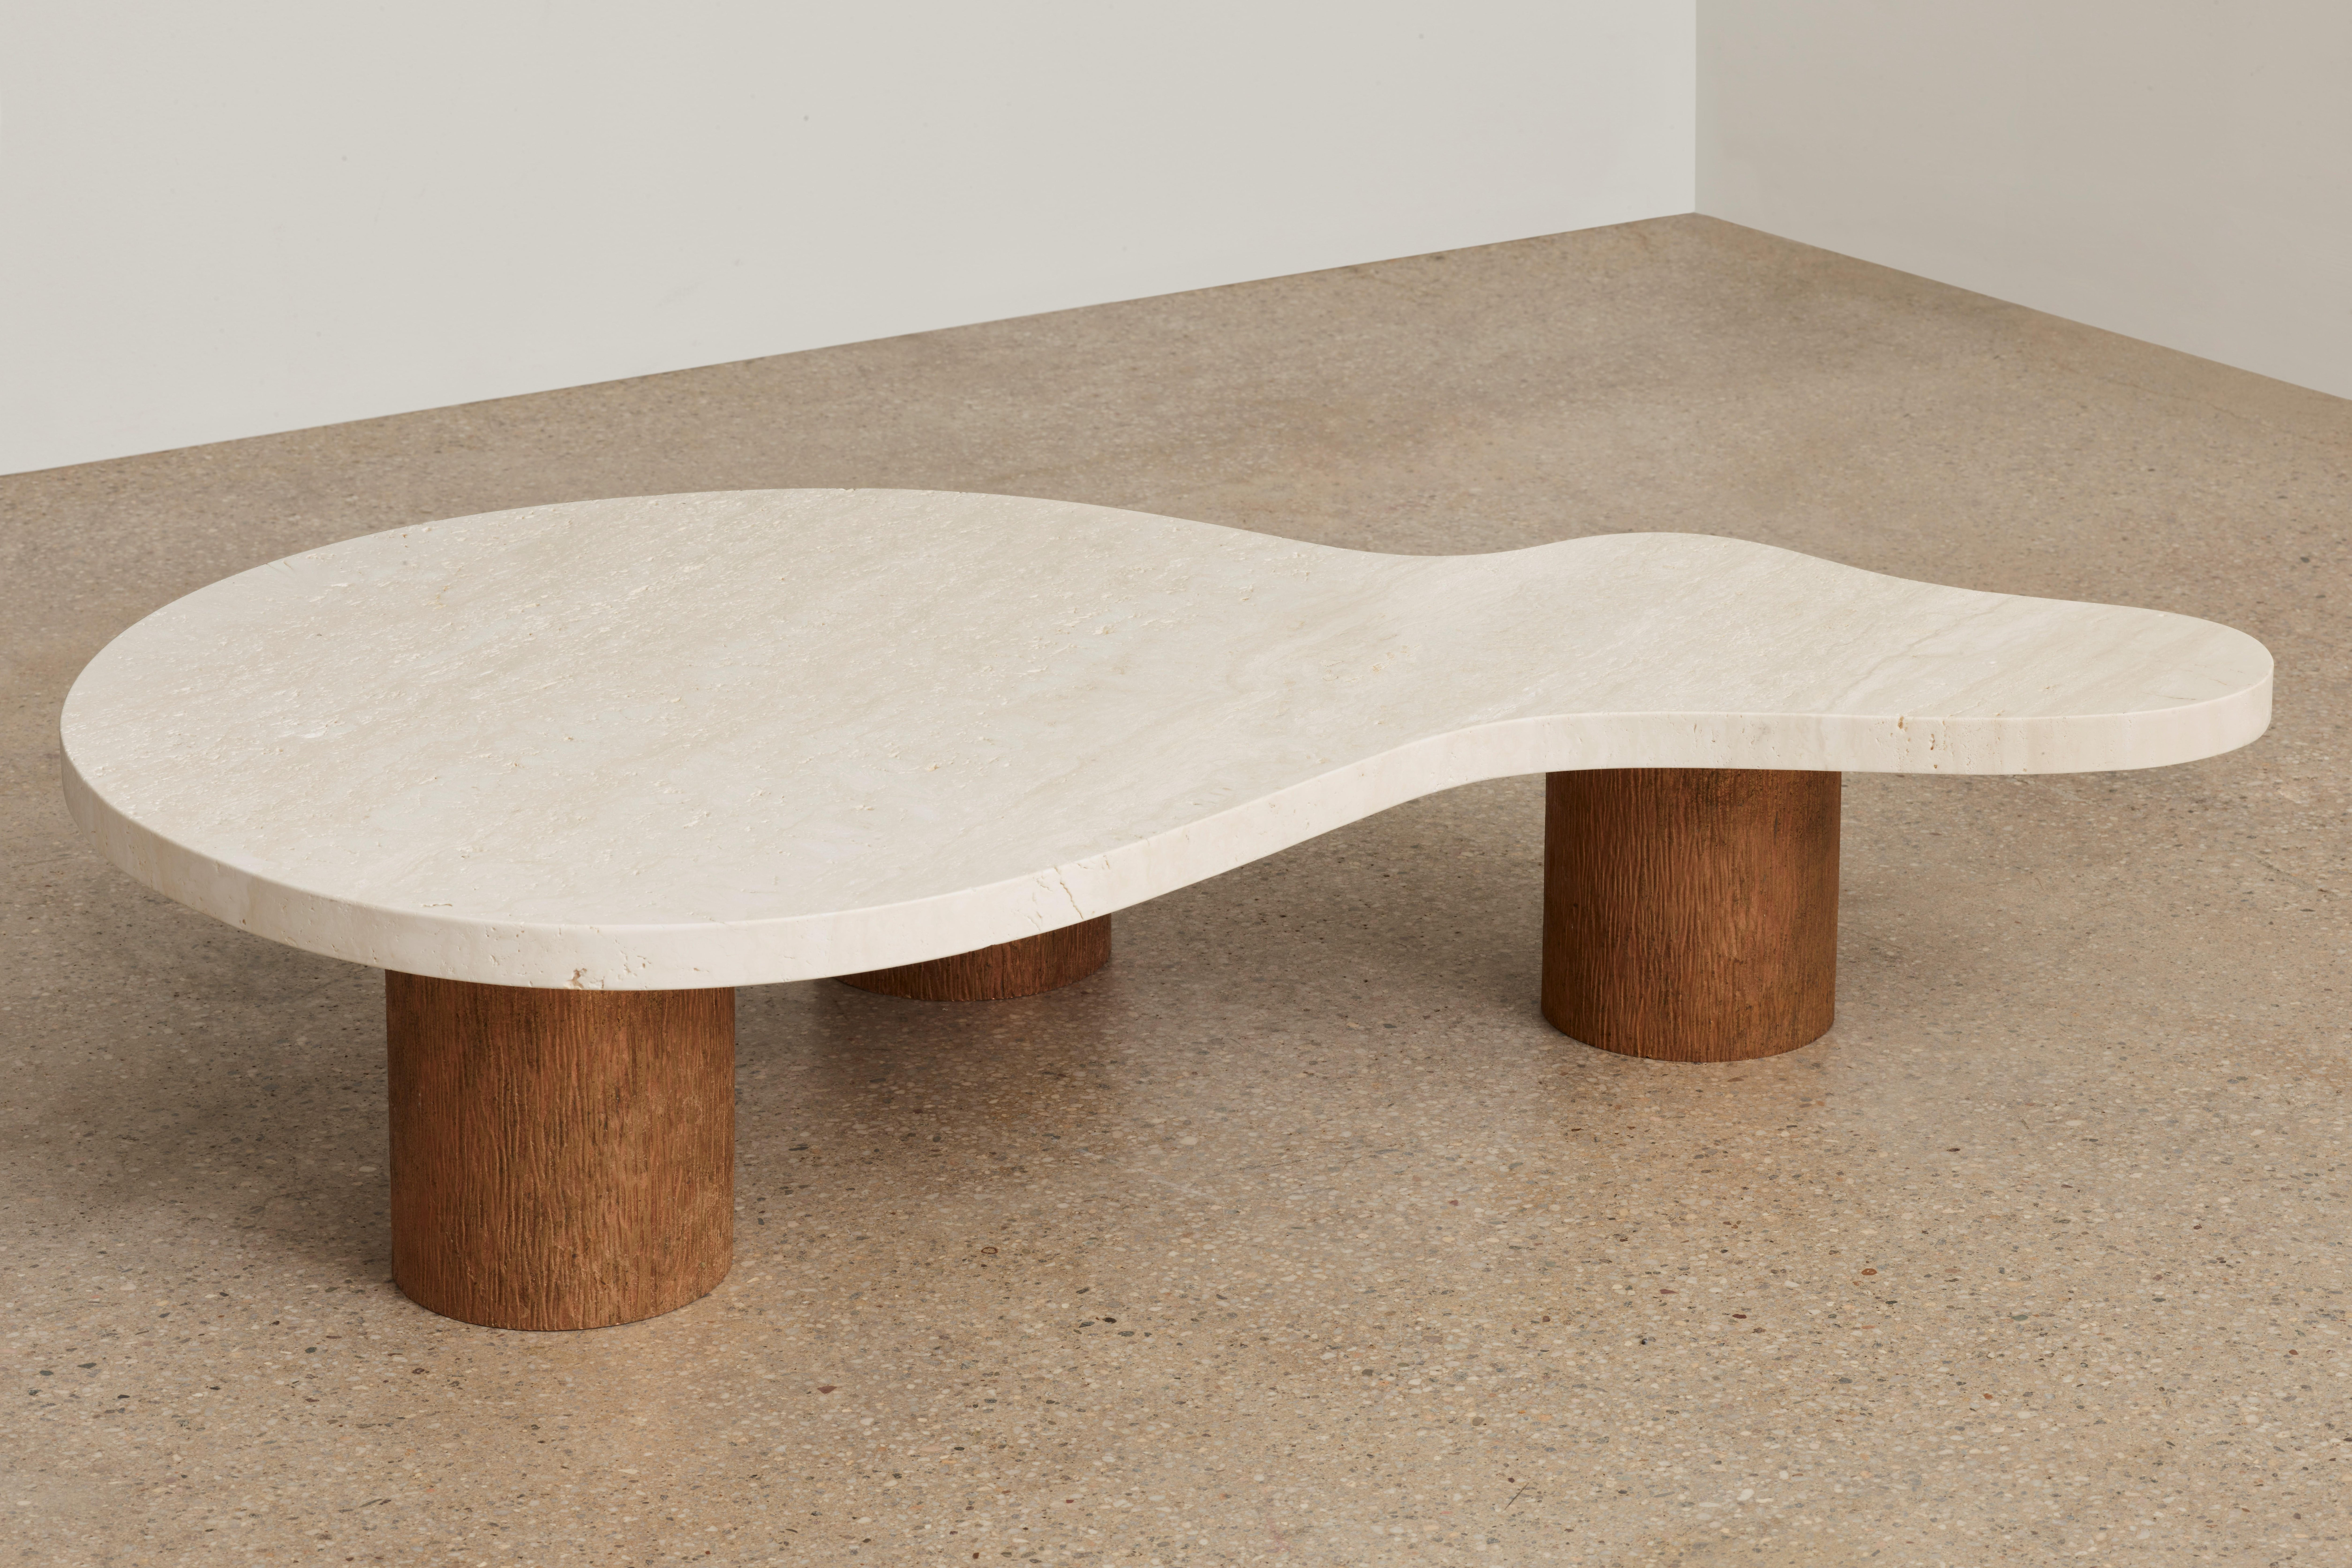 Luca coffee table large by Umberto Bellardi Ricci
Dimensions: D 55” x W 34” x H 13.5 in
Materials: Travertine, Bronze legs.

Umberto Bellardi Ricci is an Italian sculptor and architect based in New York City, practicing across London, Mexico, and